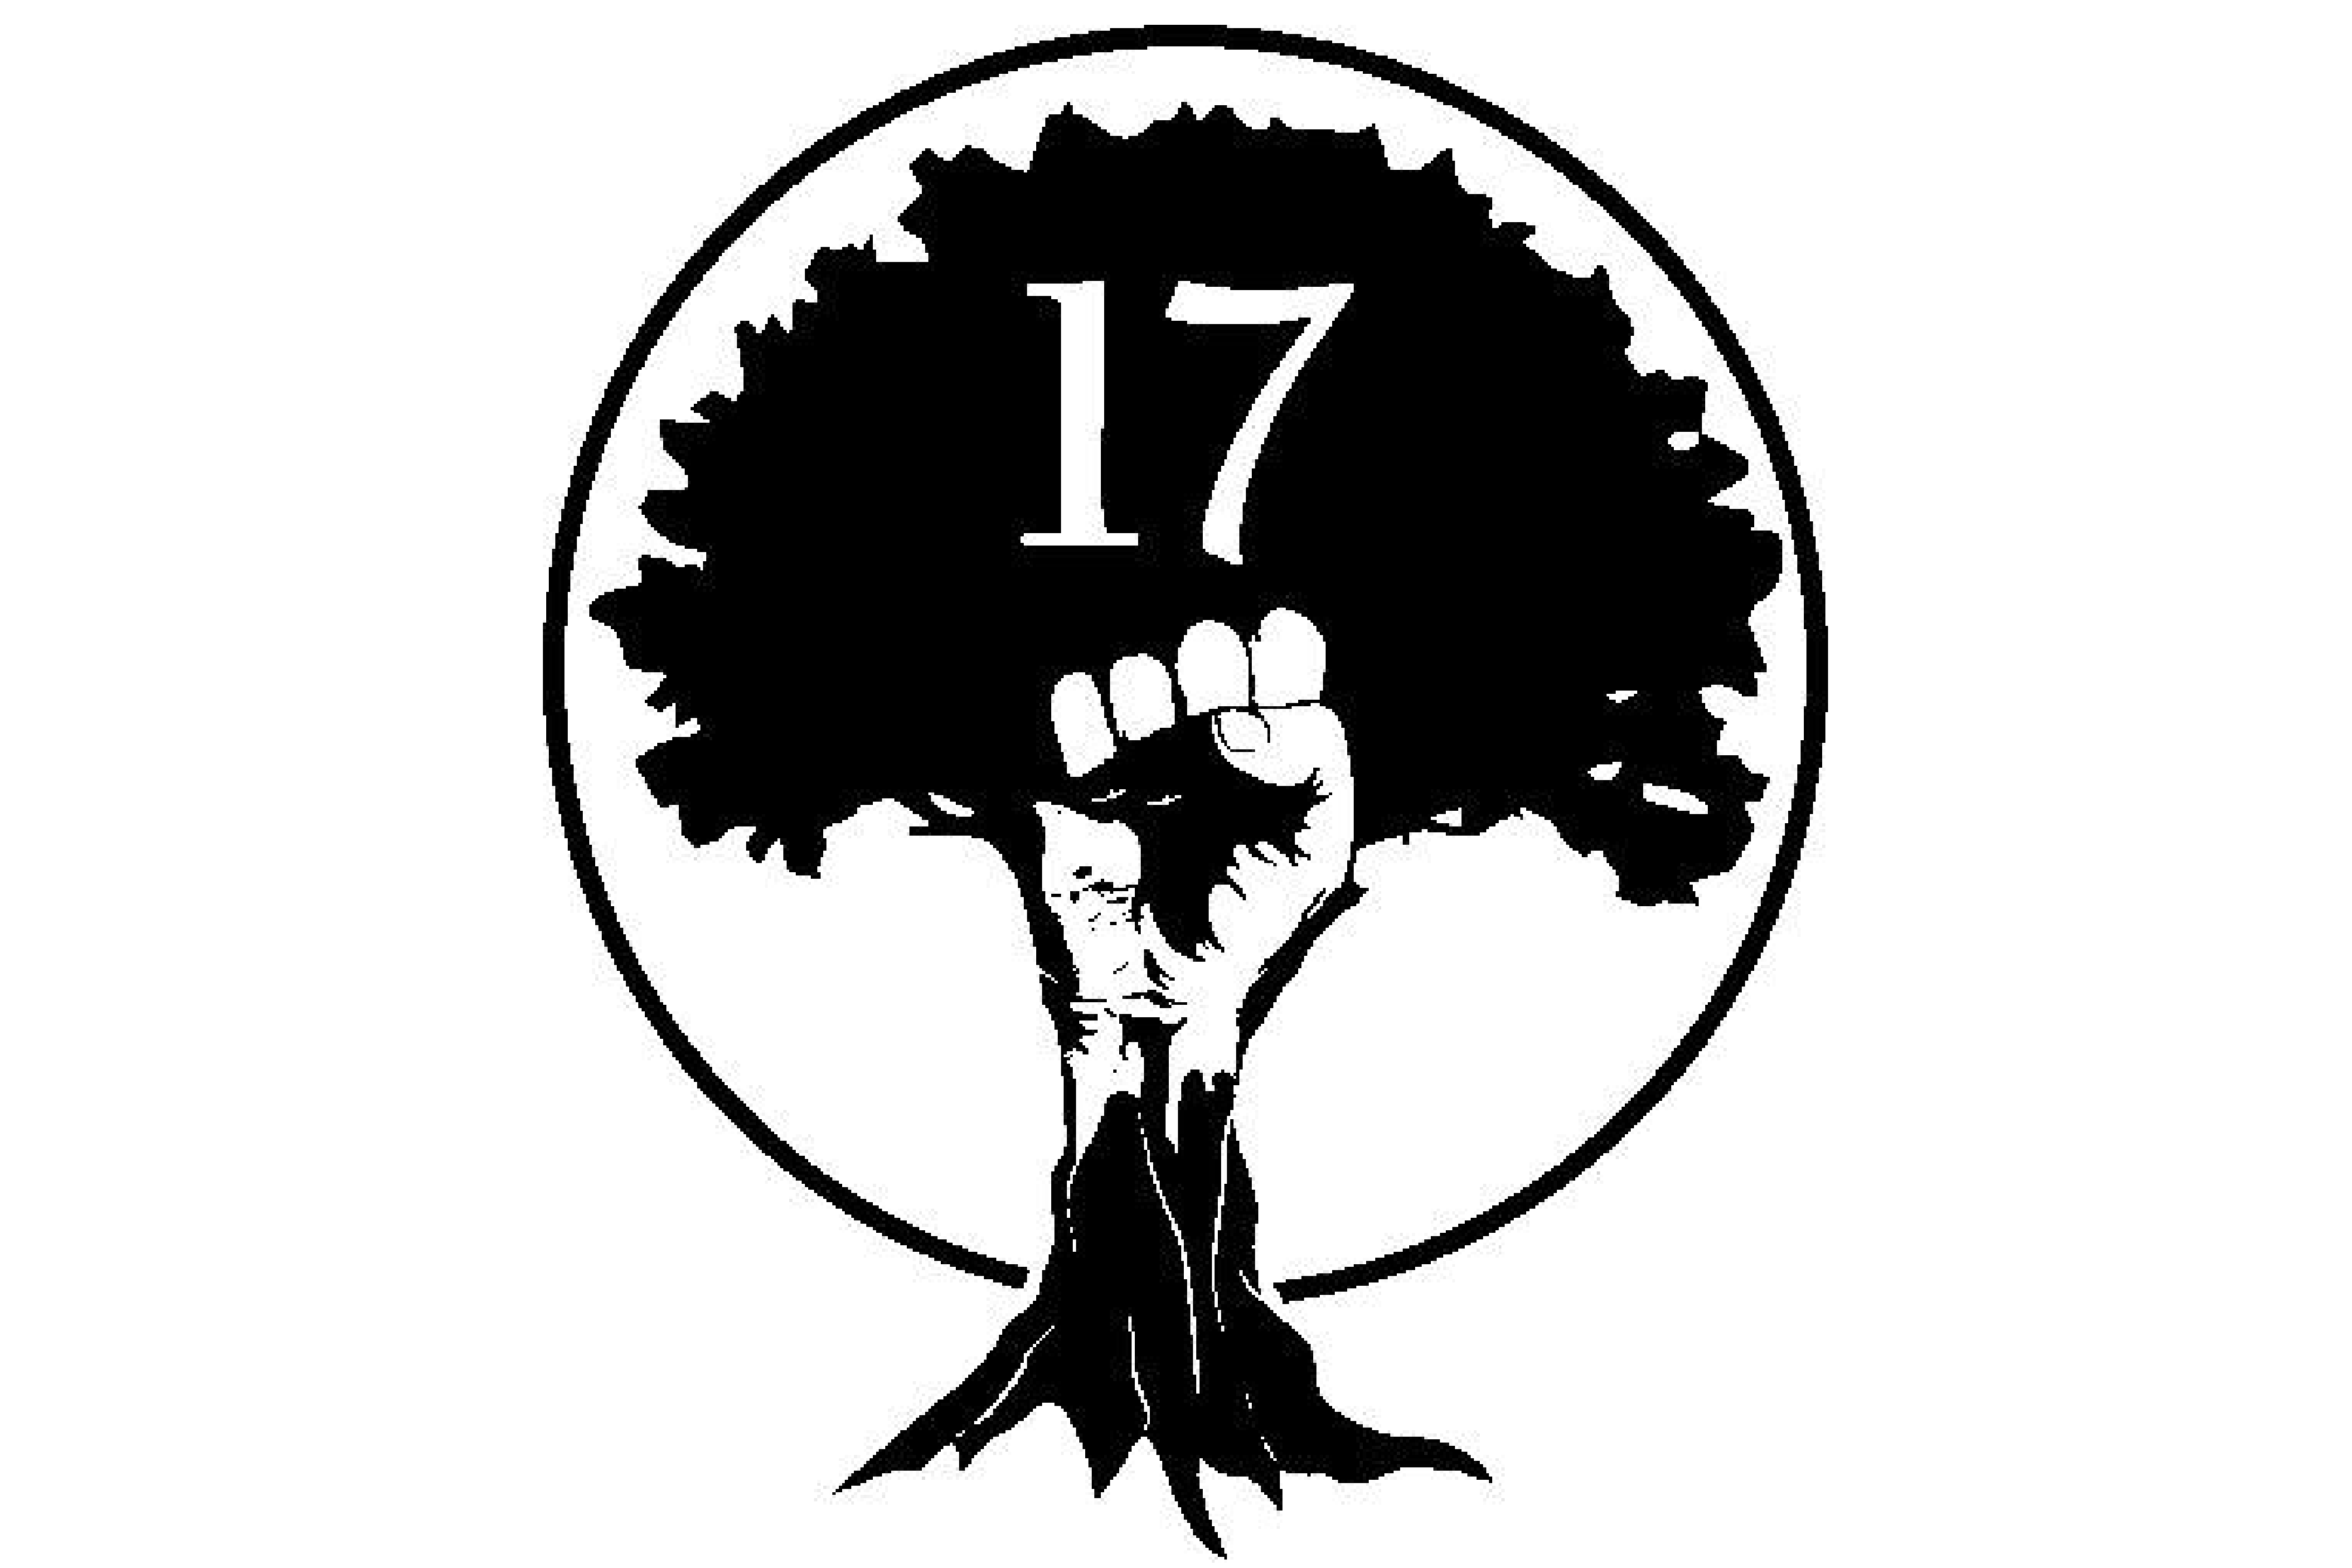 17 for Peace and Justice